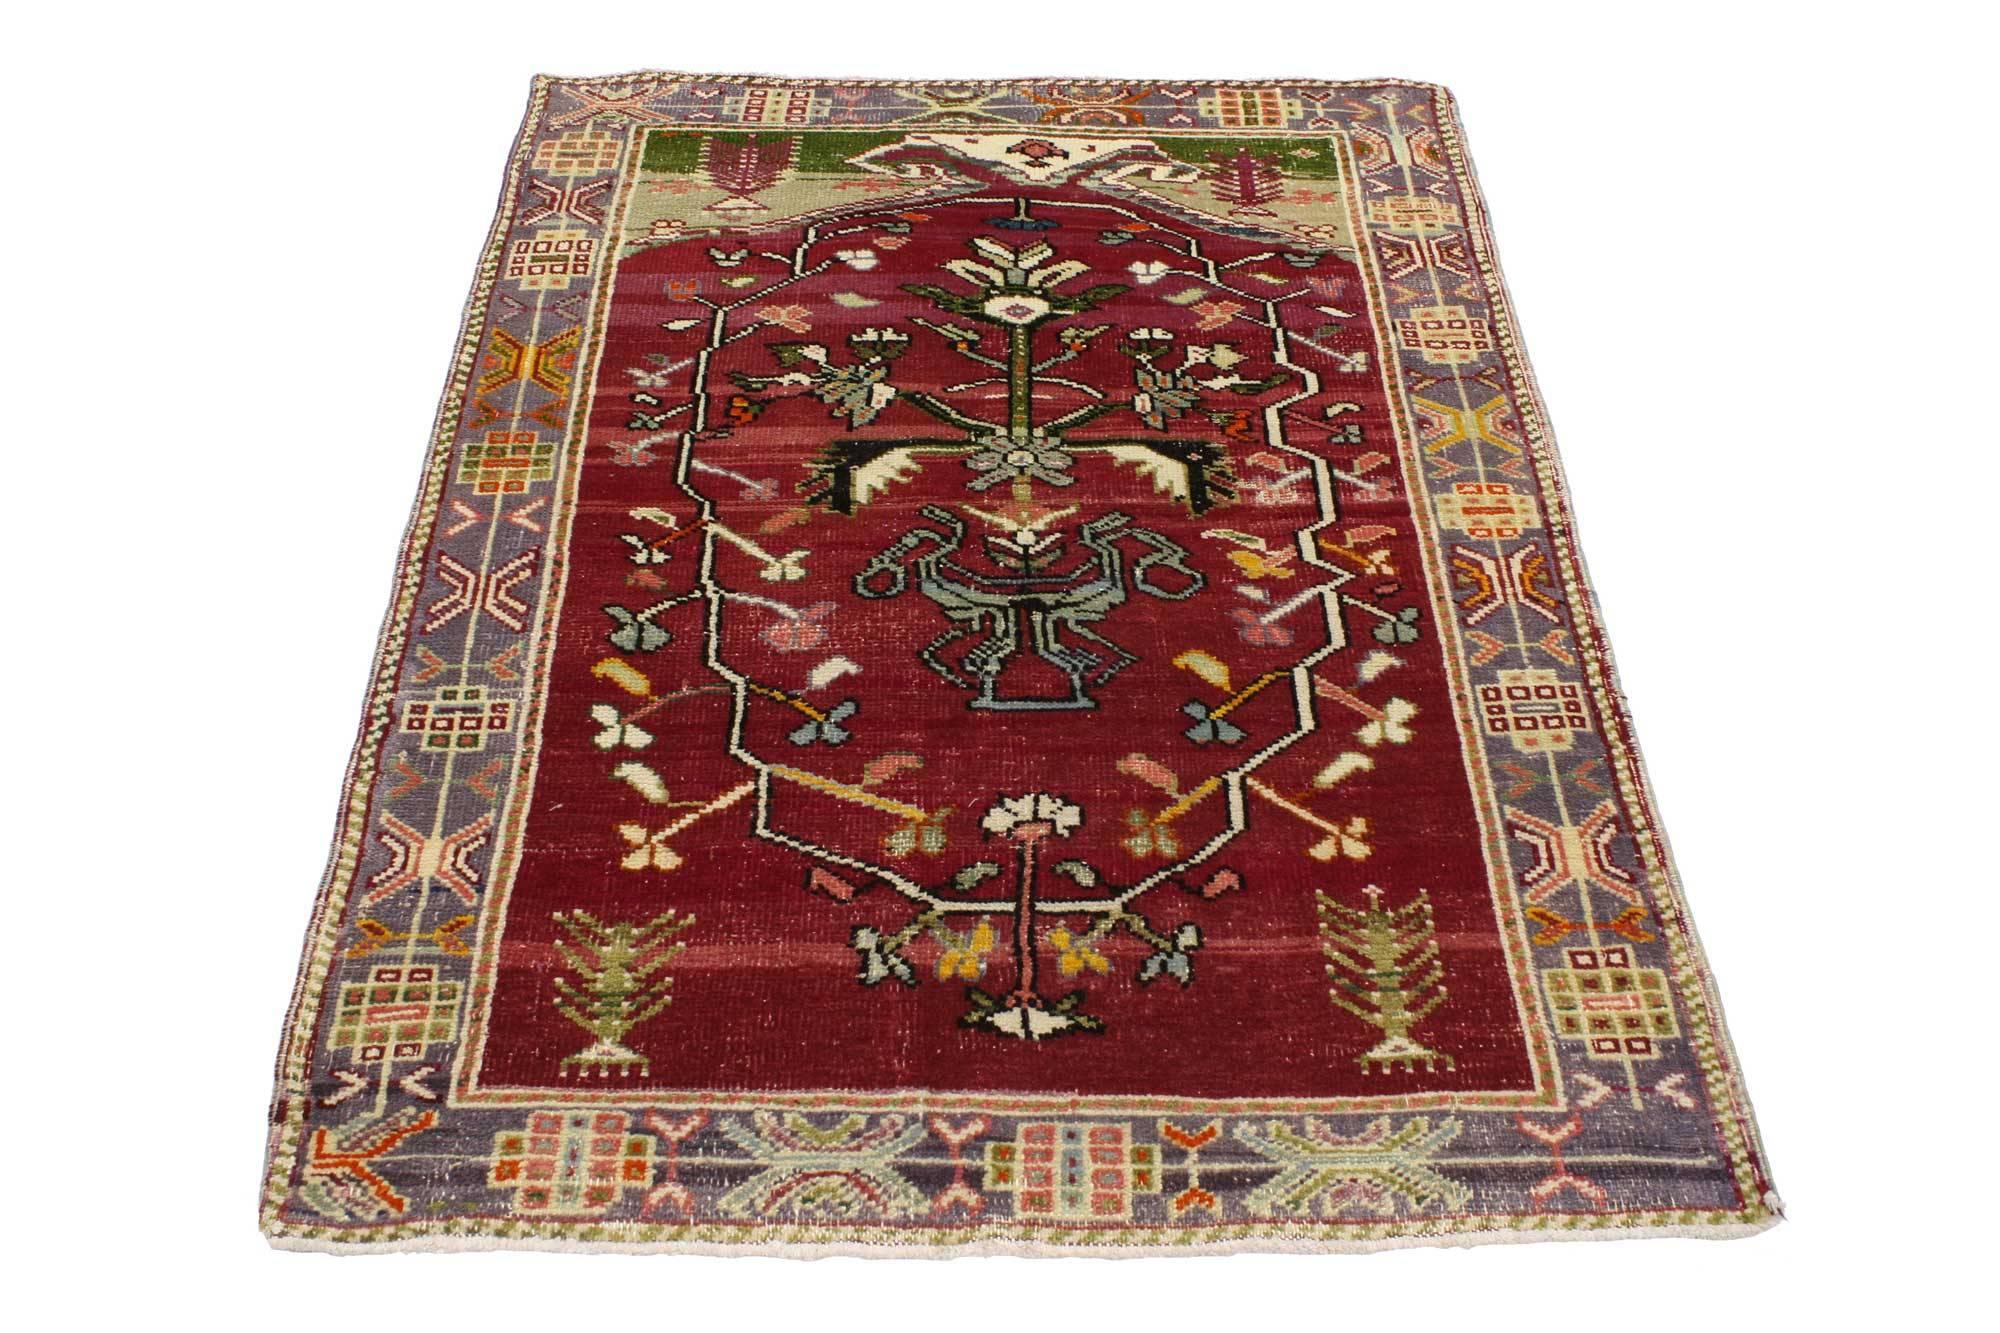 51751, Art Deco style vintage Turkish Oushak rug, kitchen, foyer or entry rug. This vintage Turkish Oushak rug features a modern Art Deco style. Immersed in Anatolian history and refined colors, this vintage Oushak rug combines simplicity with